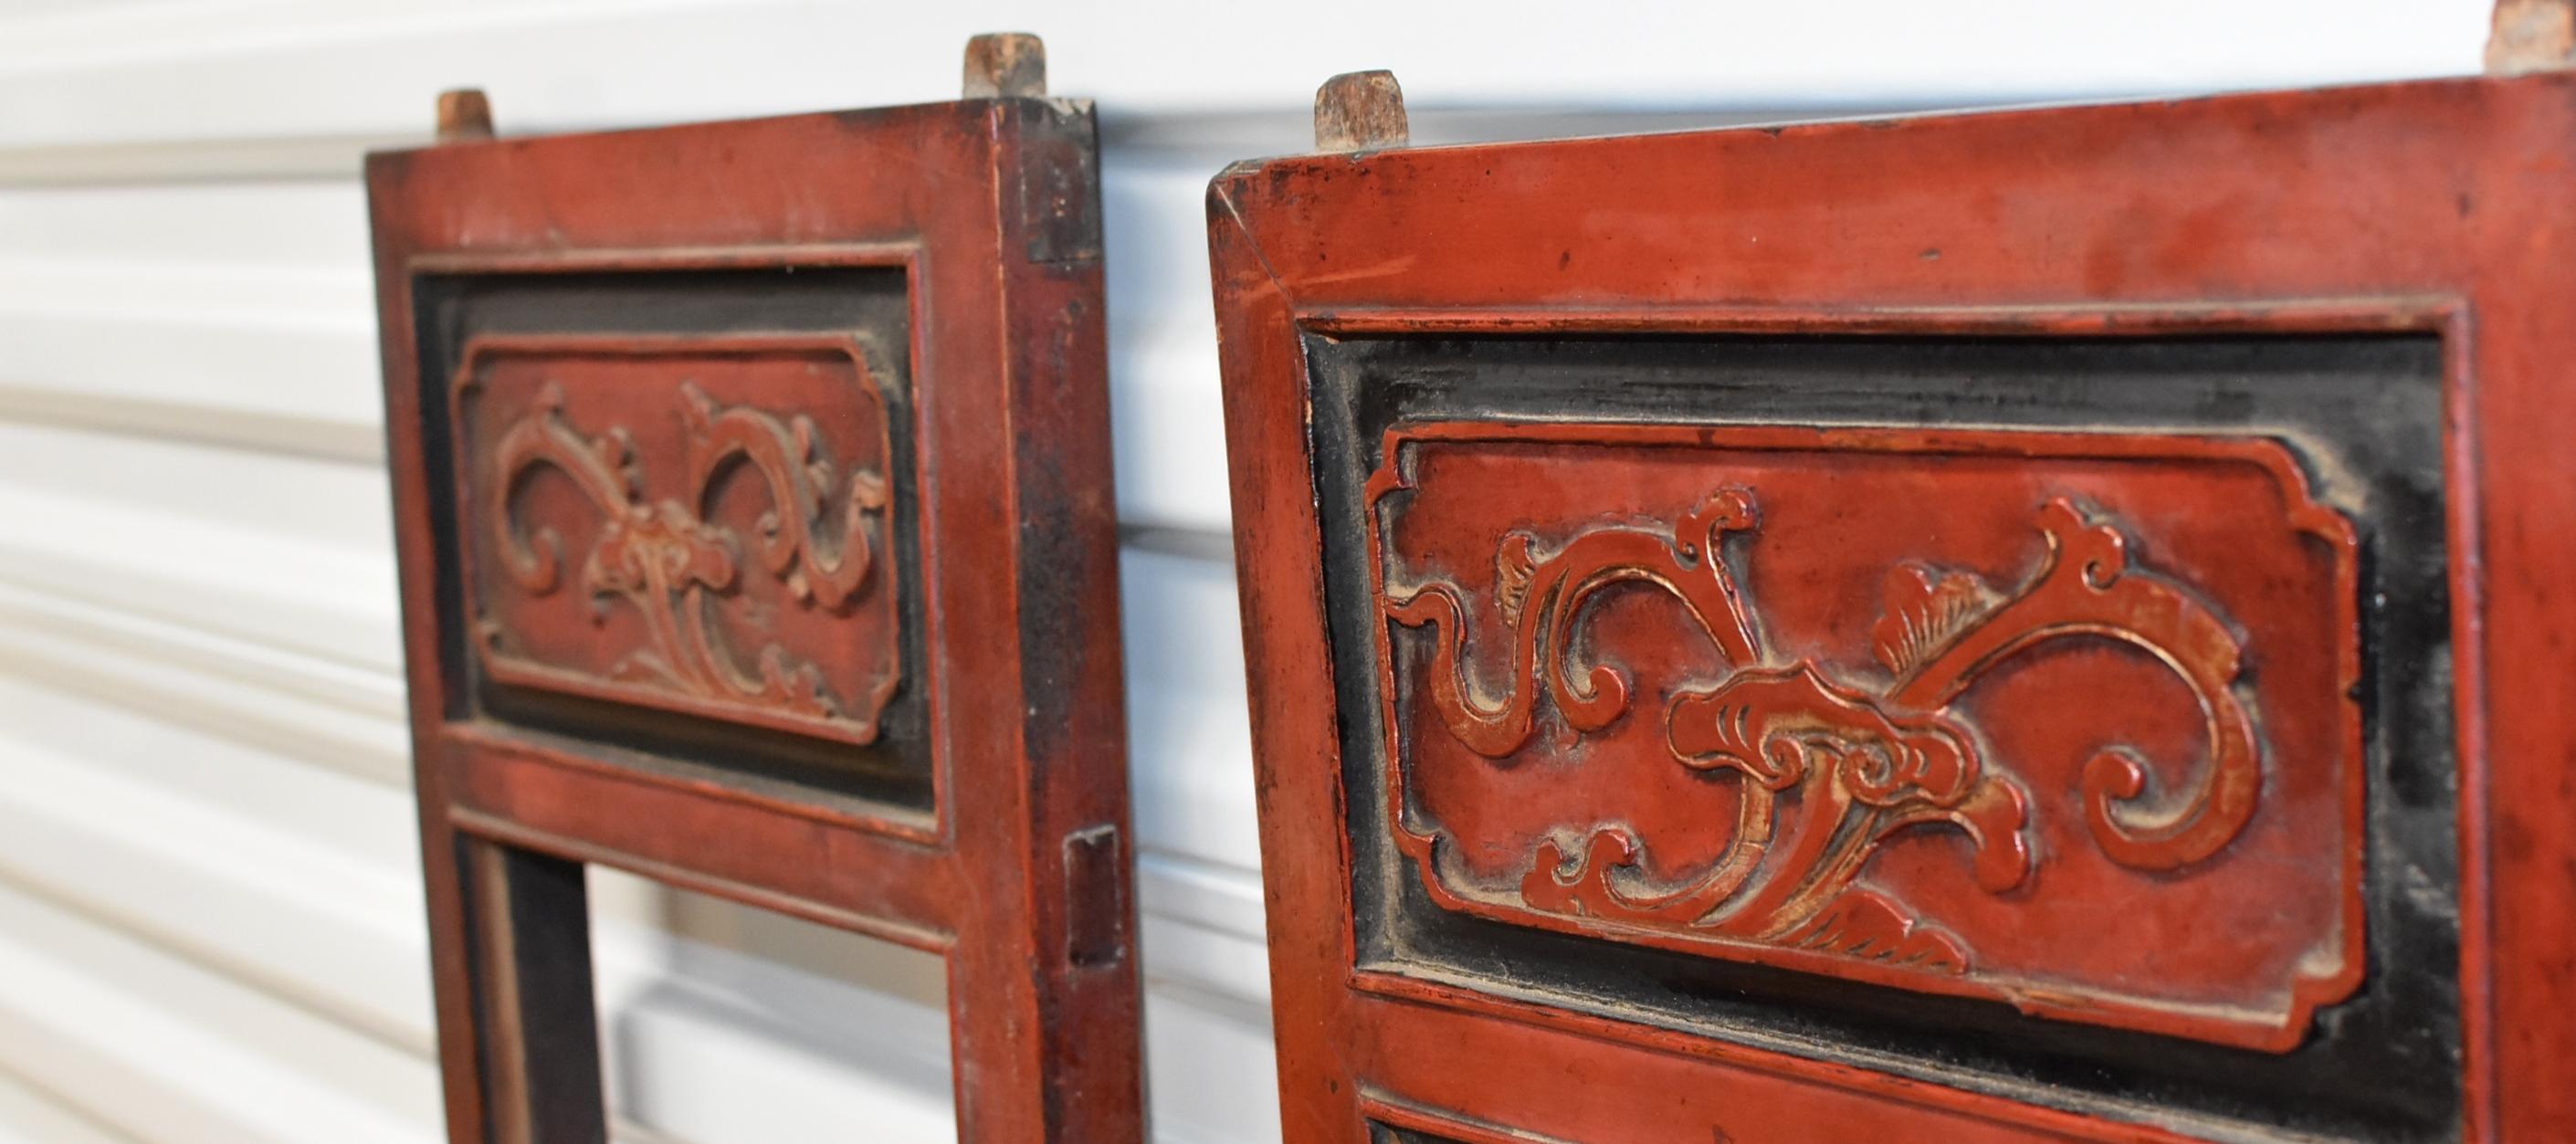 A pair of beautiful Chinese Antique screens in black, red and gold. The carvings depict opera scenes. On one screen, a Goddess standing in the pavilion handing over a sword to 2 travelers, a symbol of removing obstacle and evil spirits. On the